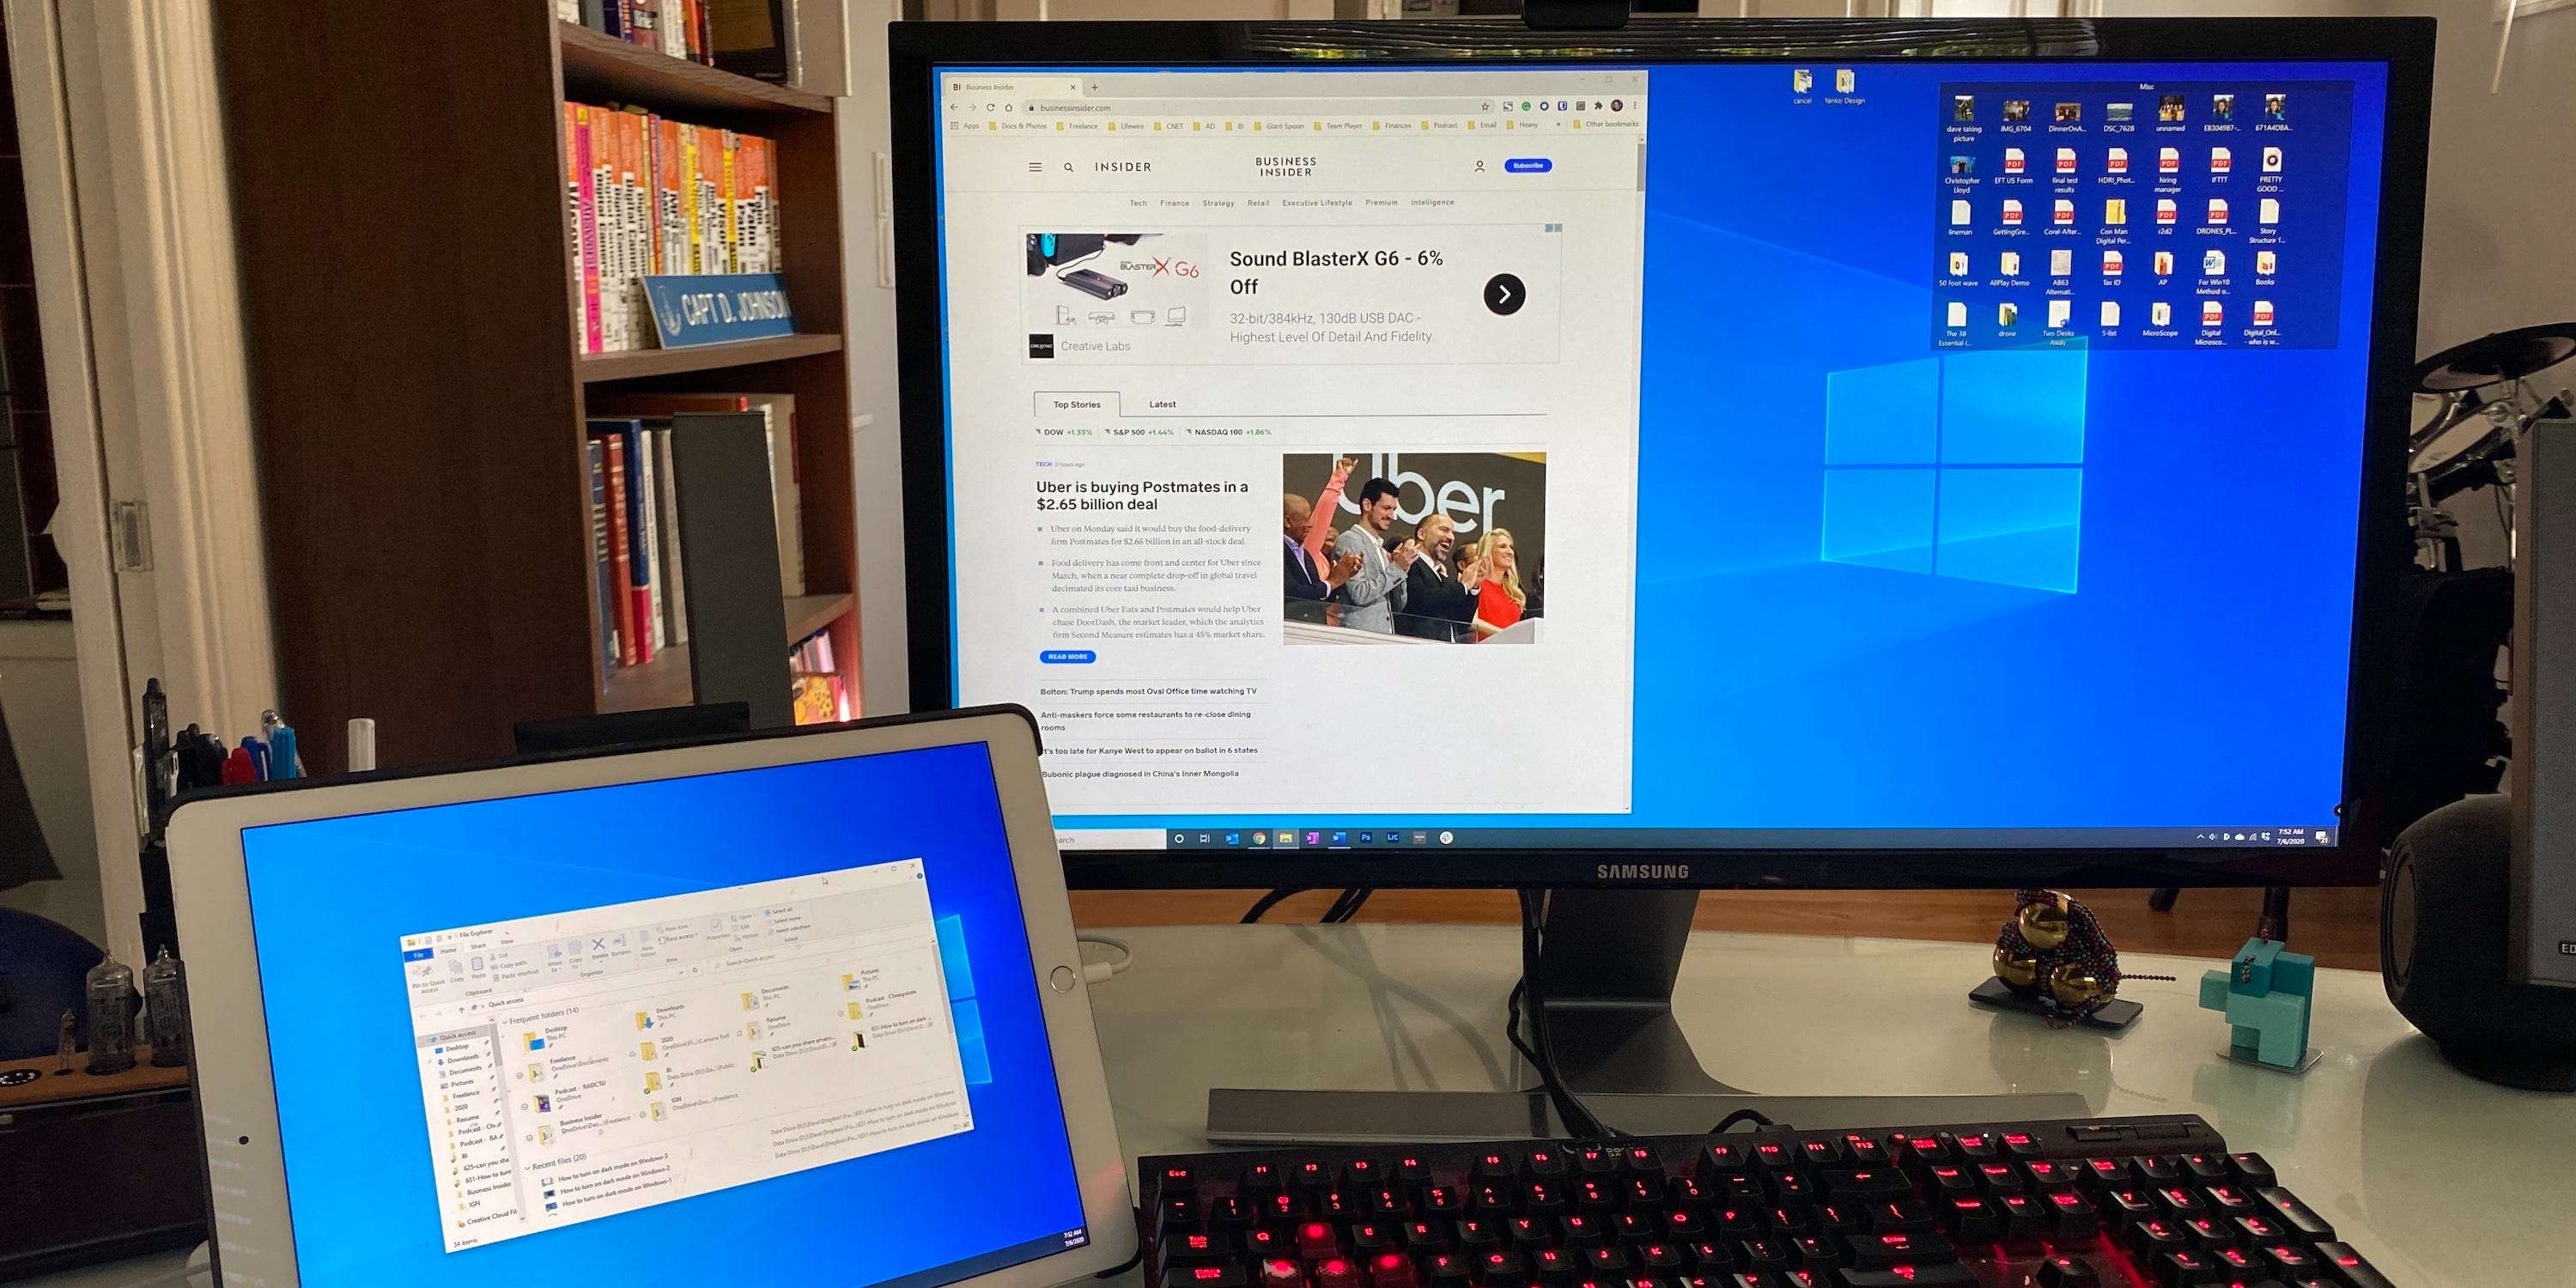 How to use your iPad as a second monitor for your Windows computer